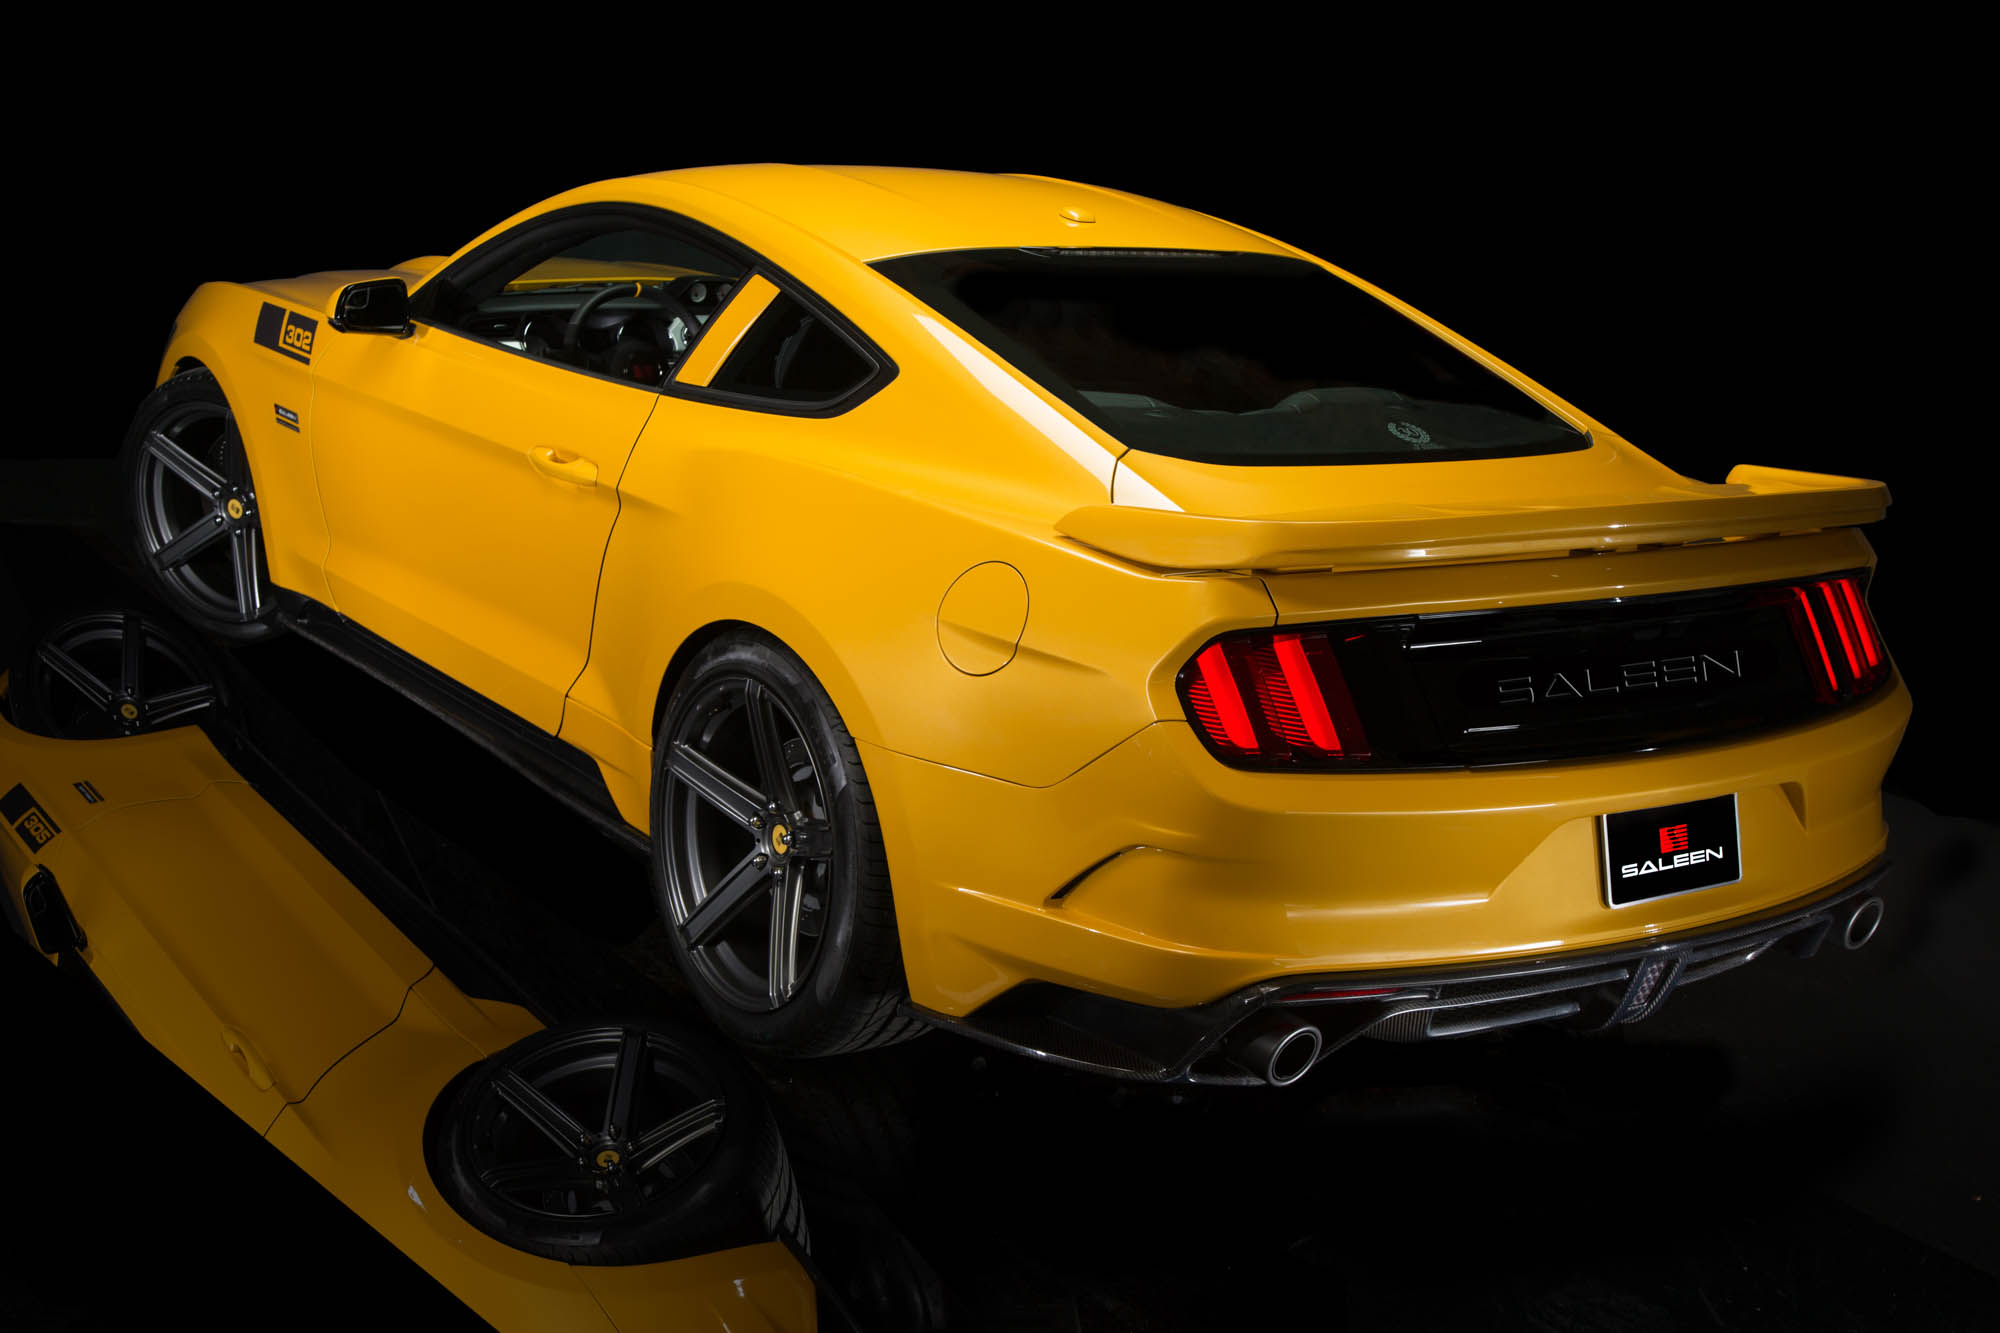 What Is A S550 Mustang? - What Is A S550 Mustang?